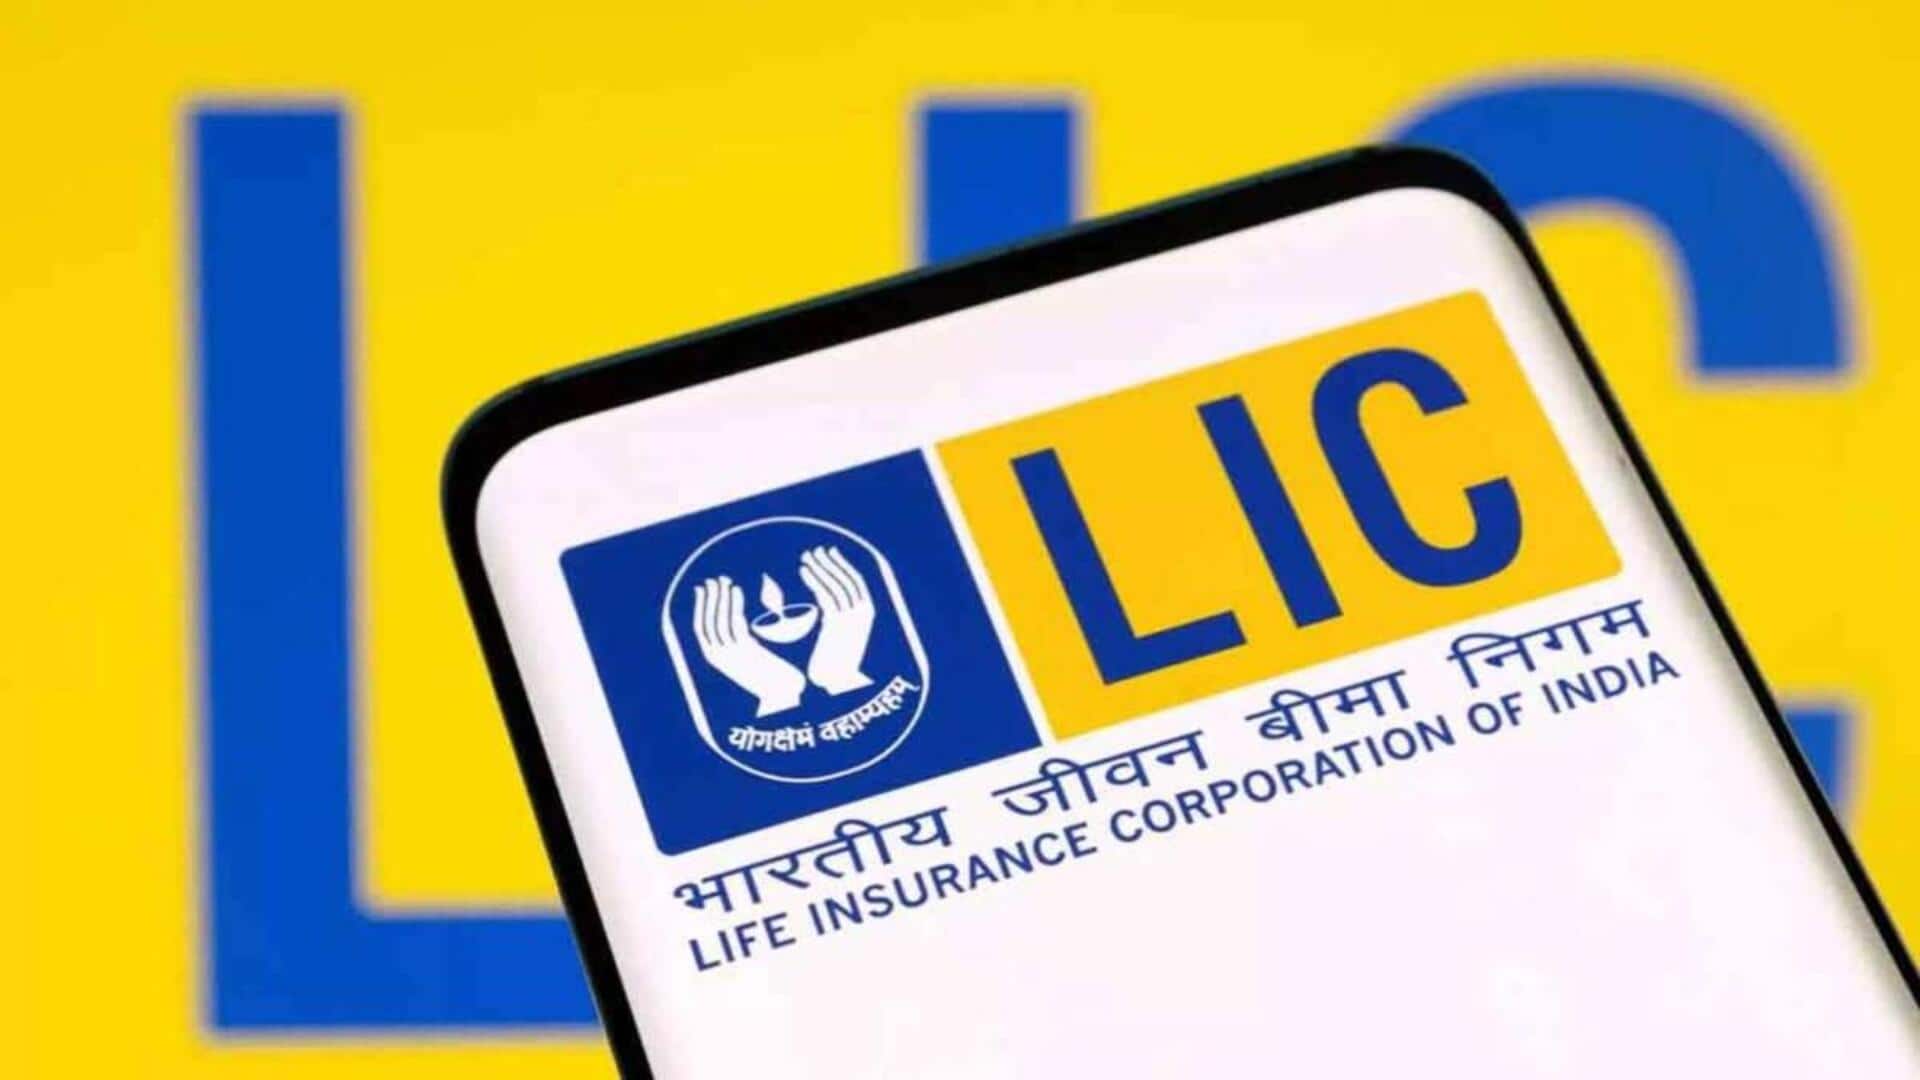 LIC Q4 earnings exceed expectations, brokerages predict 30% stock rise